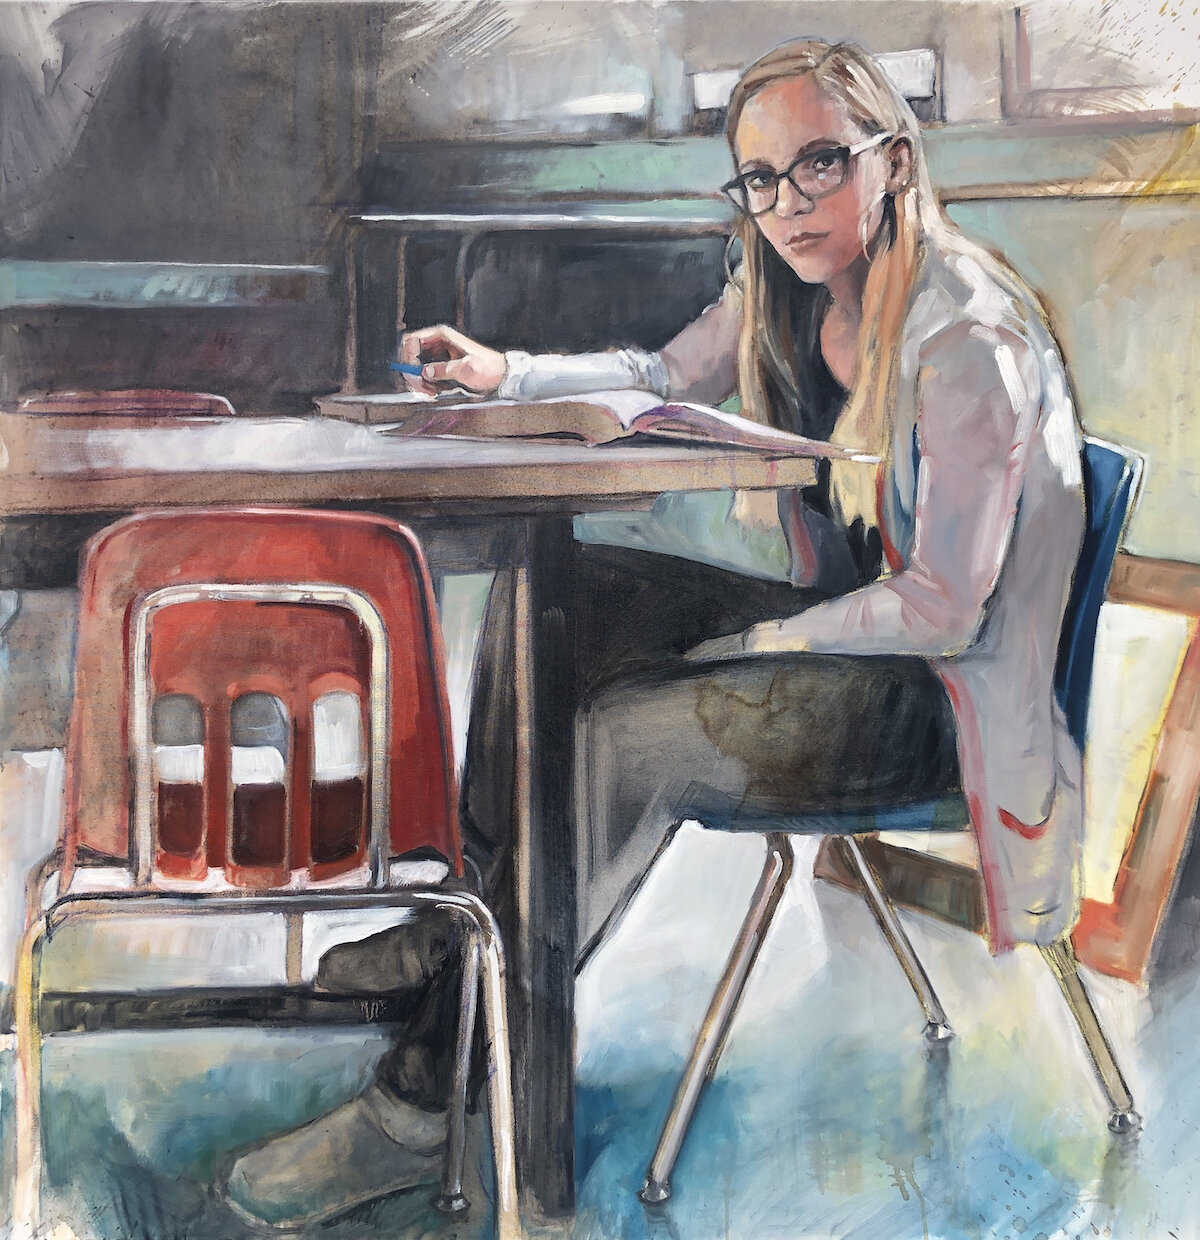    Anna and the Lone Orange Chair  , 48” x 48”, watercolor and pastel on paper 